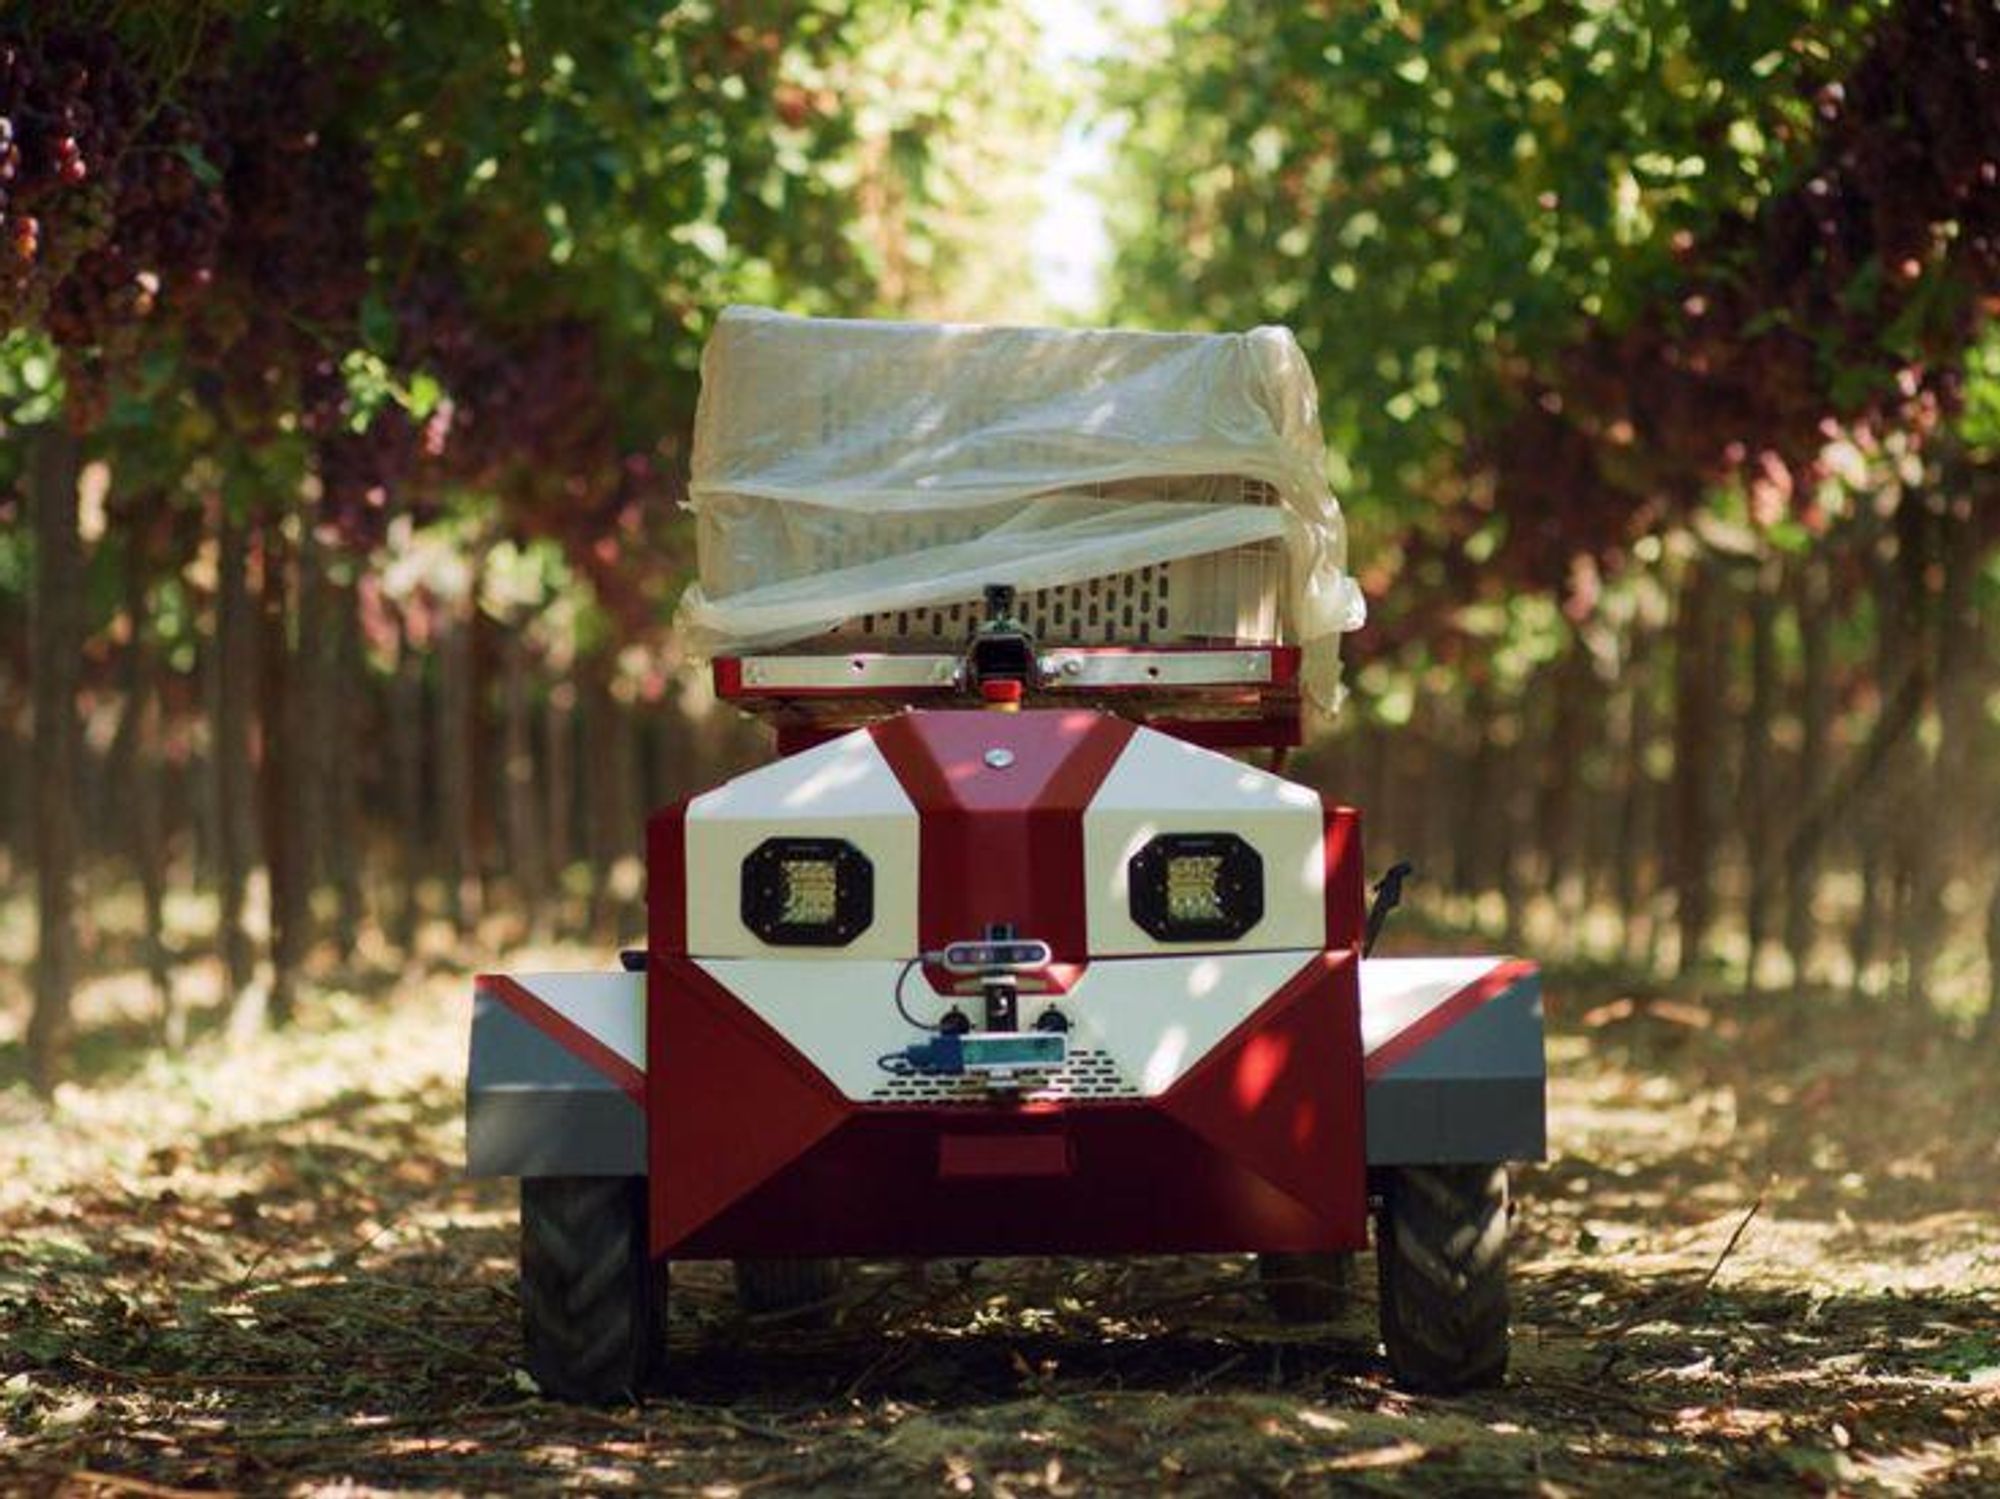 Future Acres Strikes Deal to Bring Its Produce-Picking Robots to More Farms